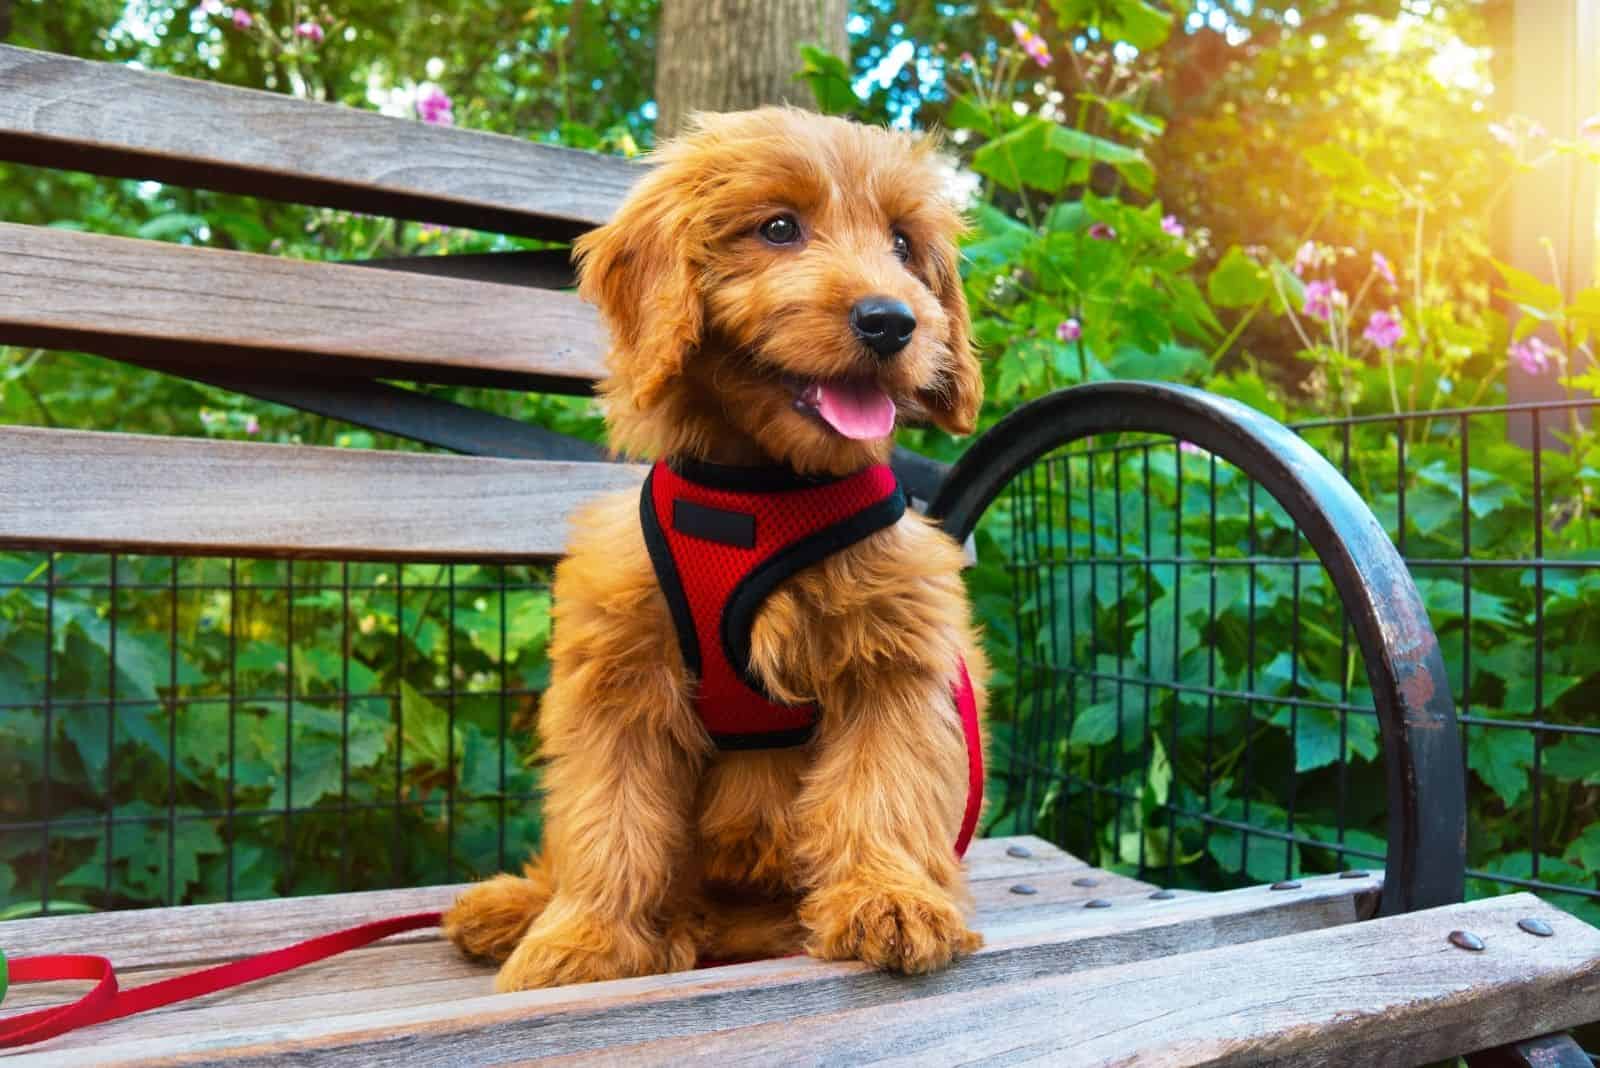 miniature goldendoodle sitting in the bench outdoors